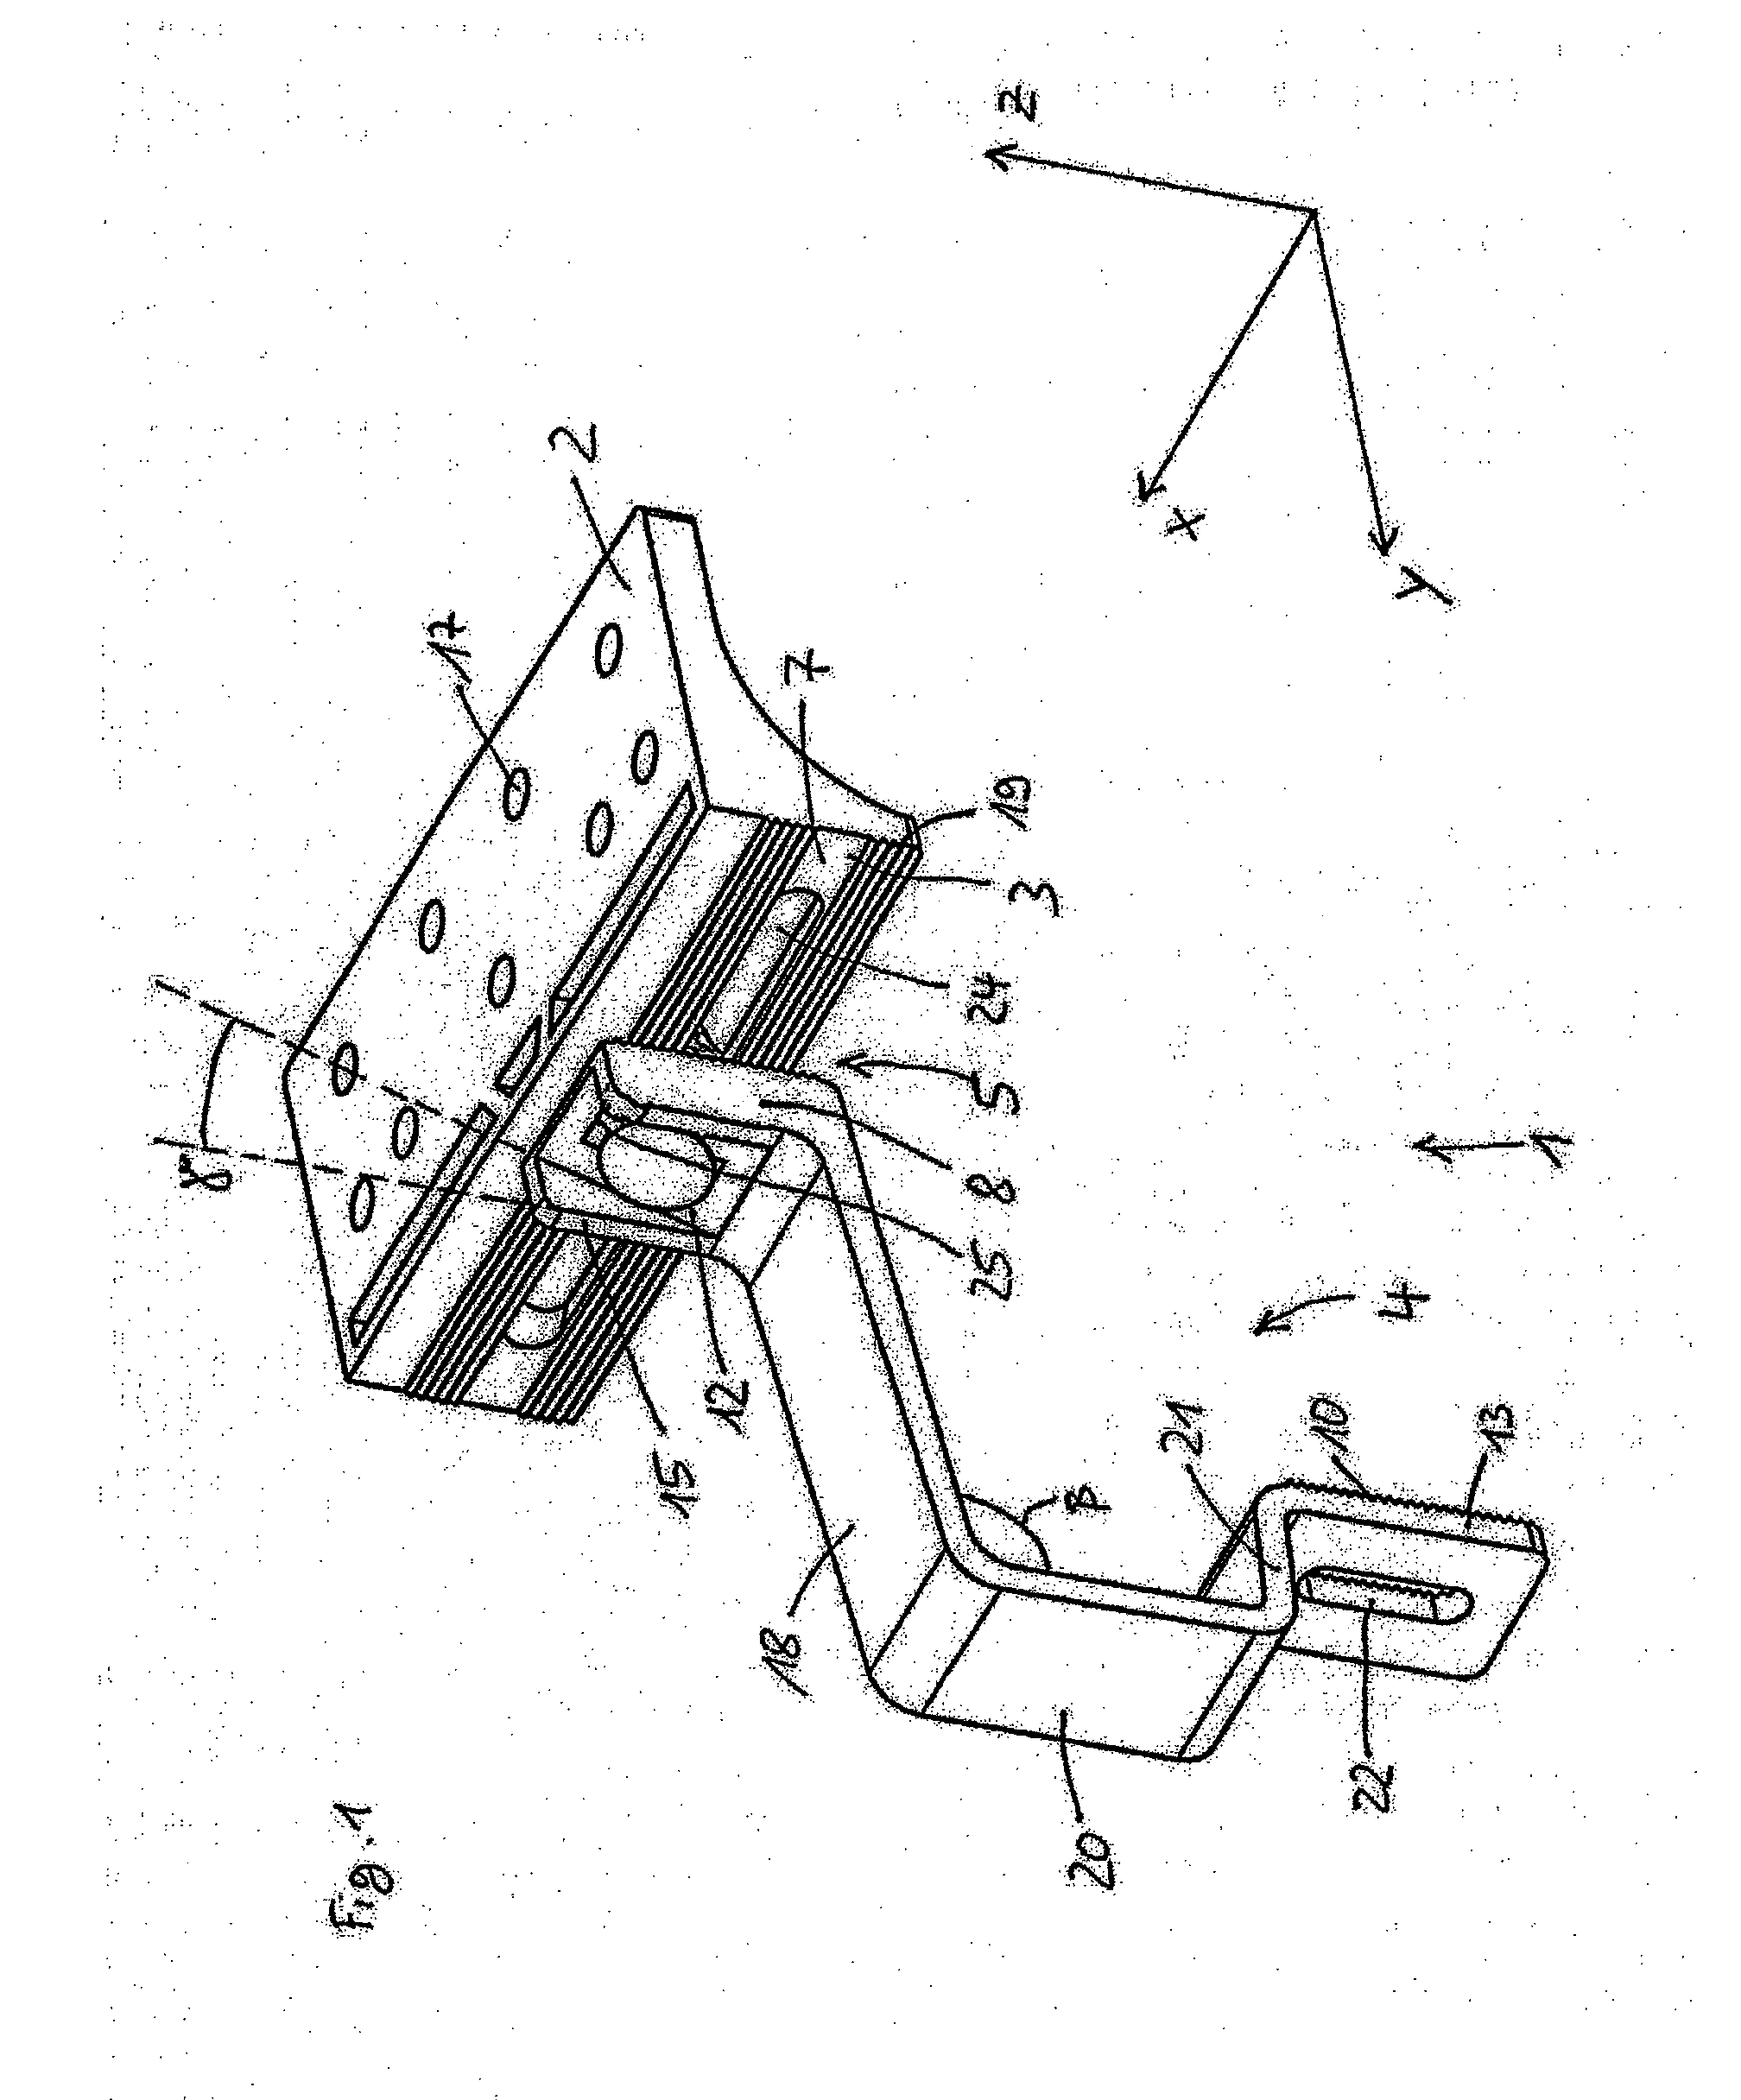 Roof hook for installing solar system modules on roofs